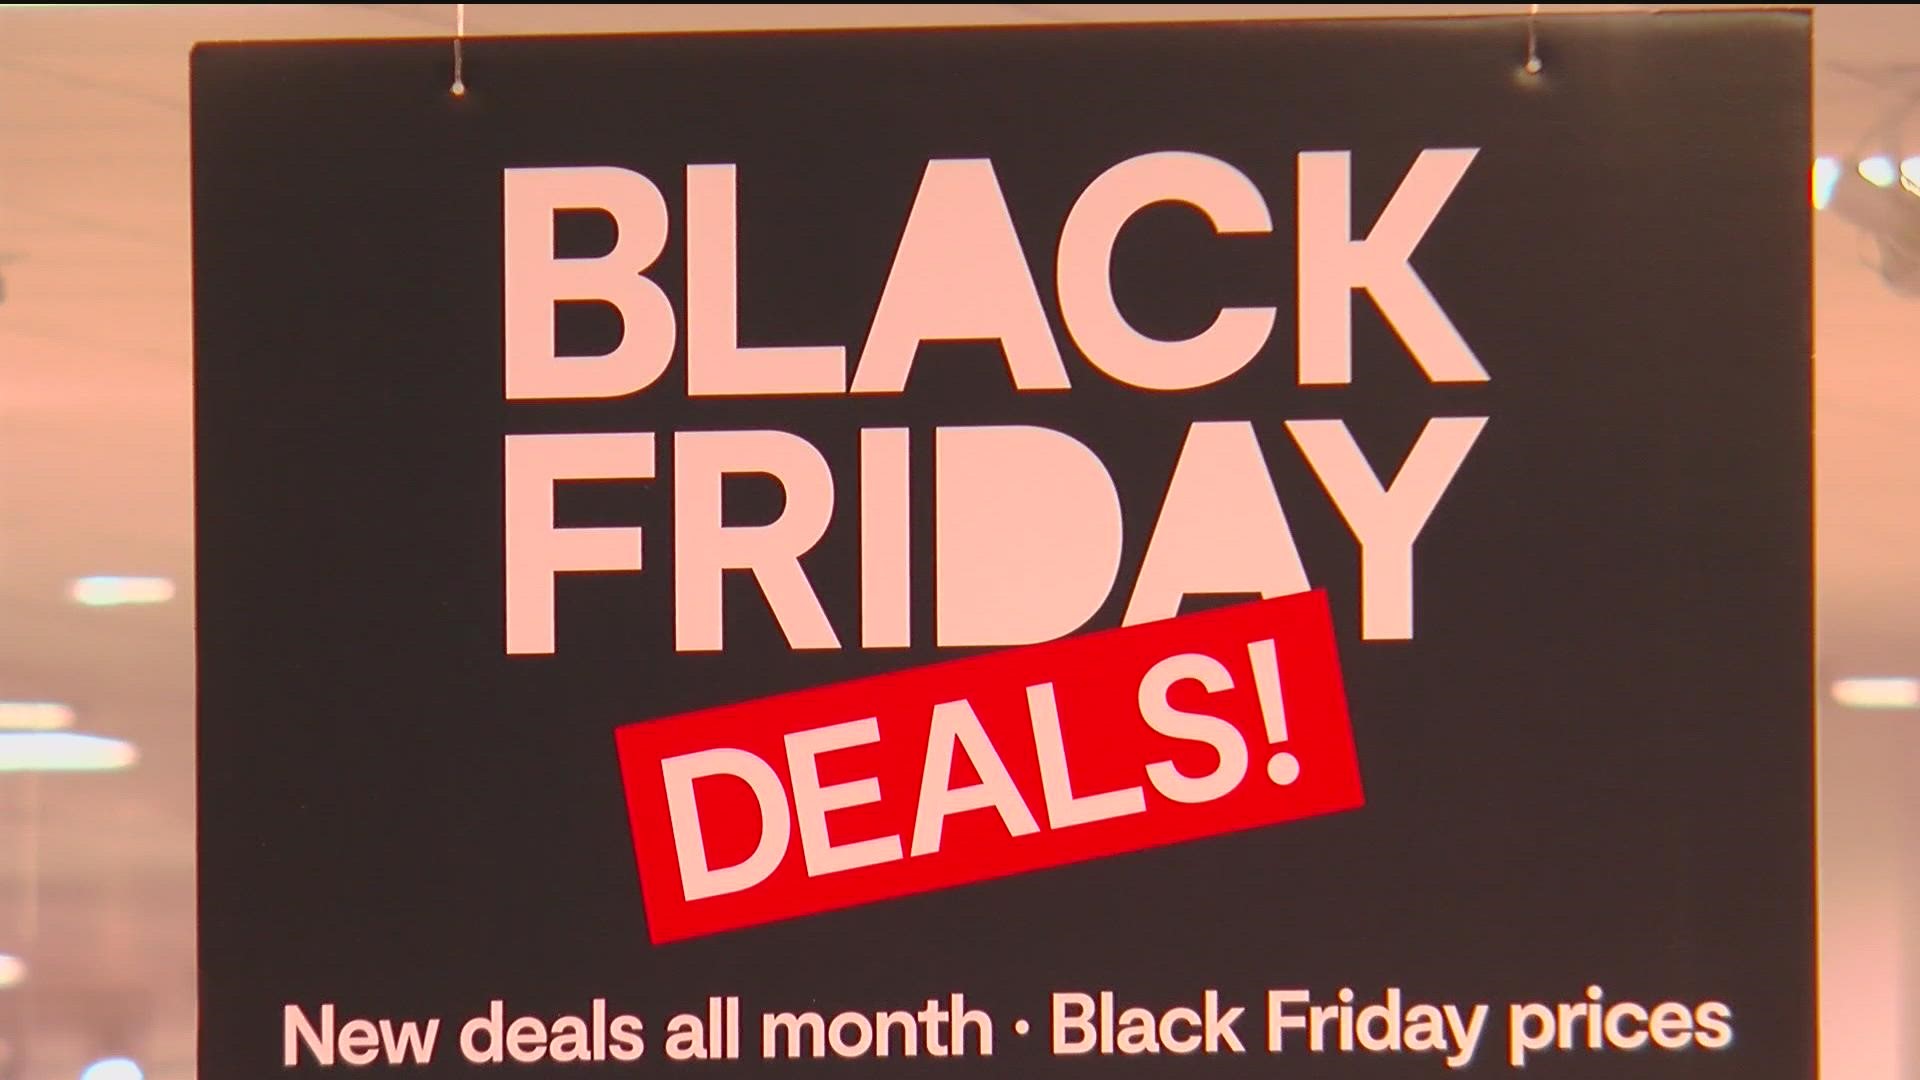 One day Black Friday deals are quickly becoming a thing of the past. Here are the changes at big box retailers that you may have noticed over the years.